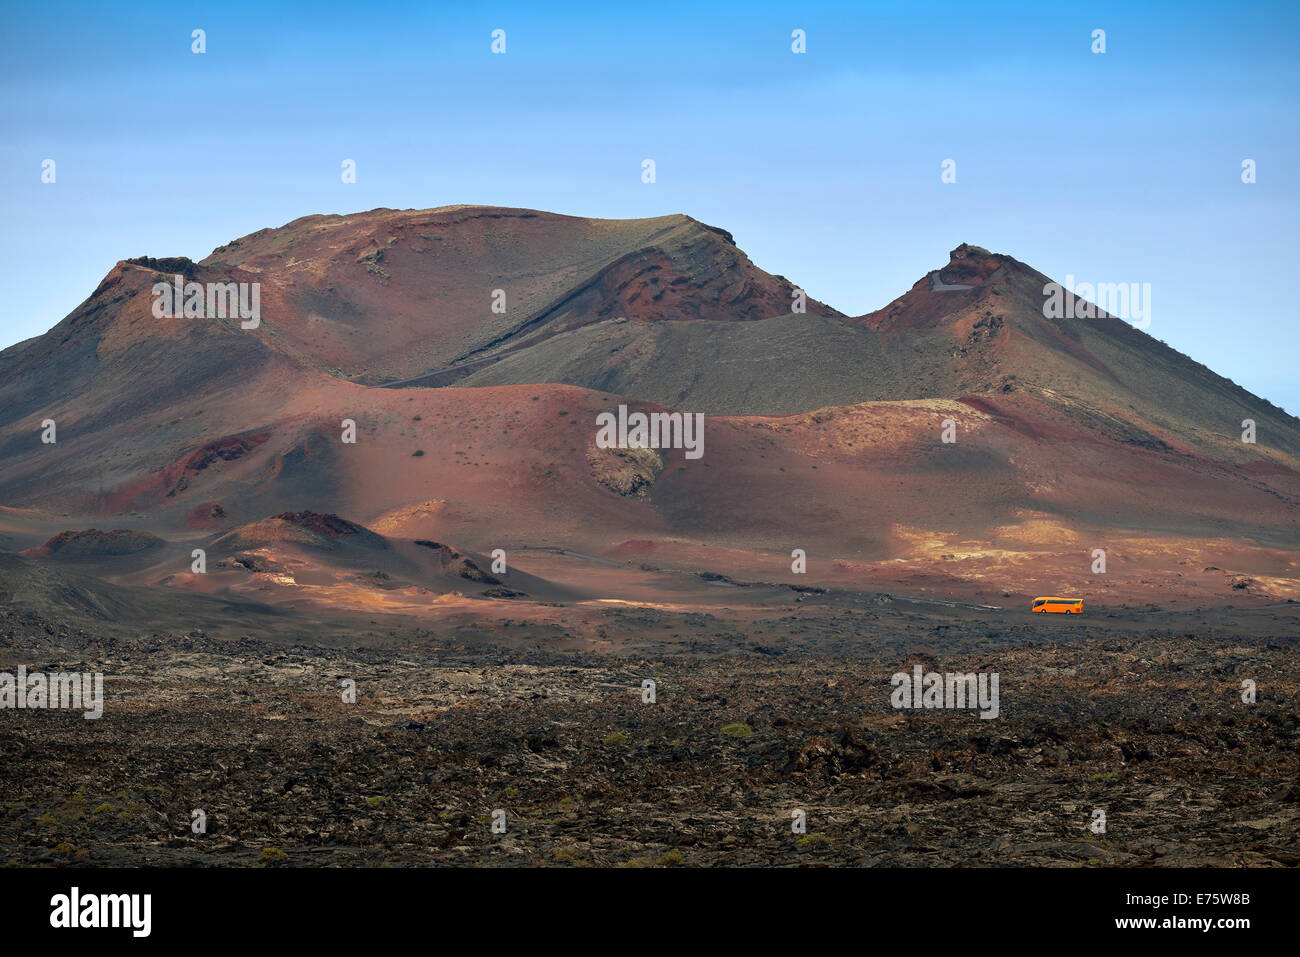 Guided bus tour through the Montanas del Fuego, Timanfaya National Park, Lanzarote, Canary Islands, Spain Stock Photo